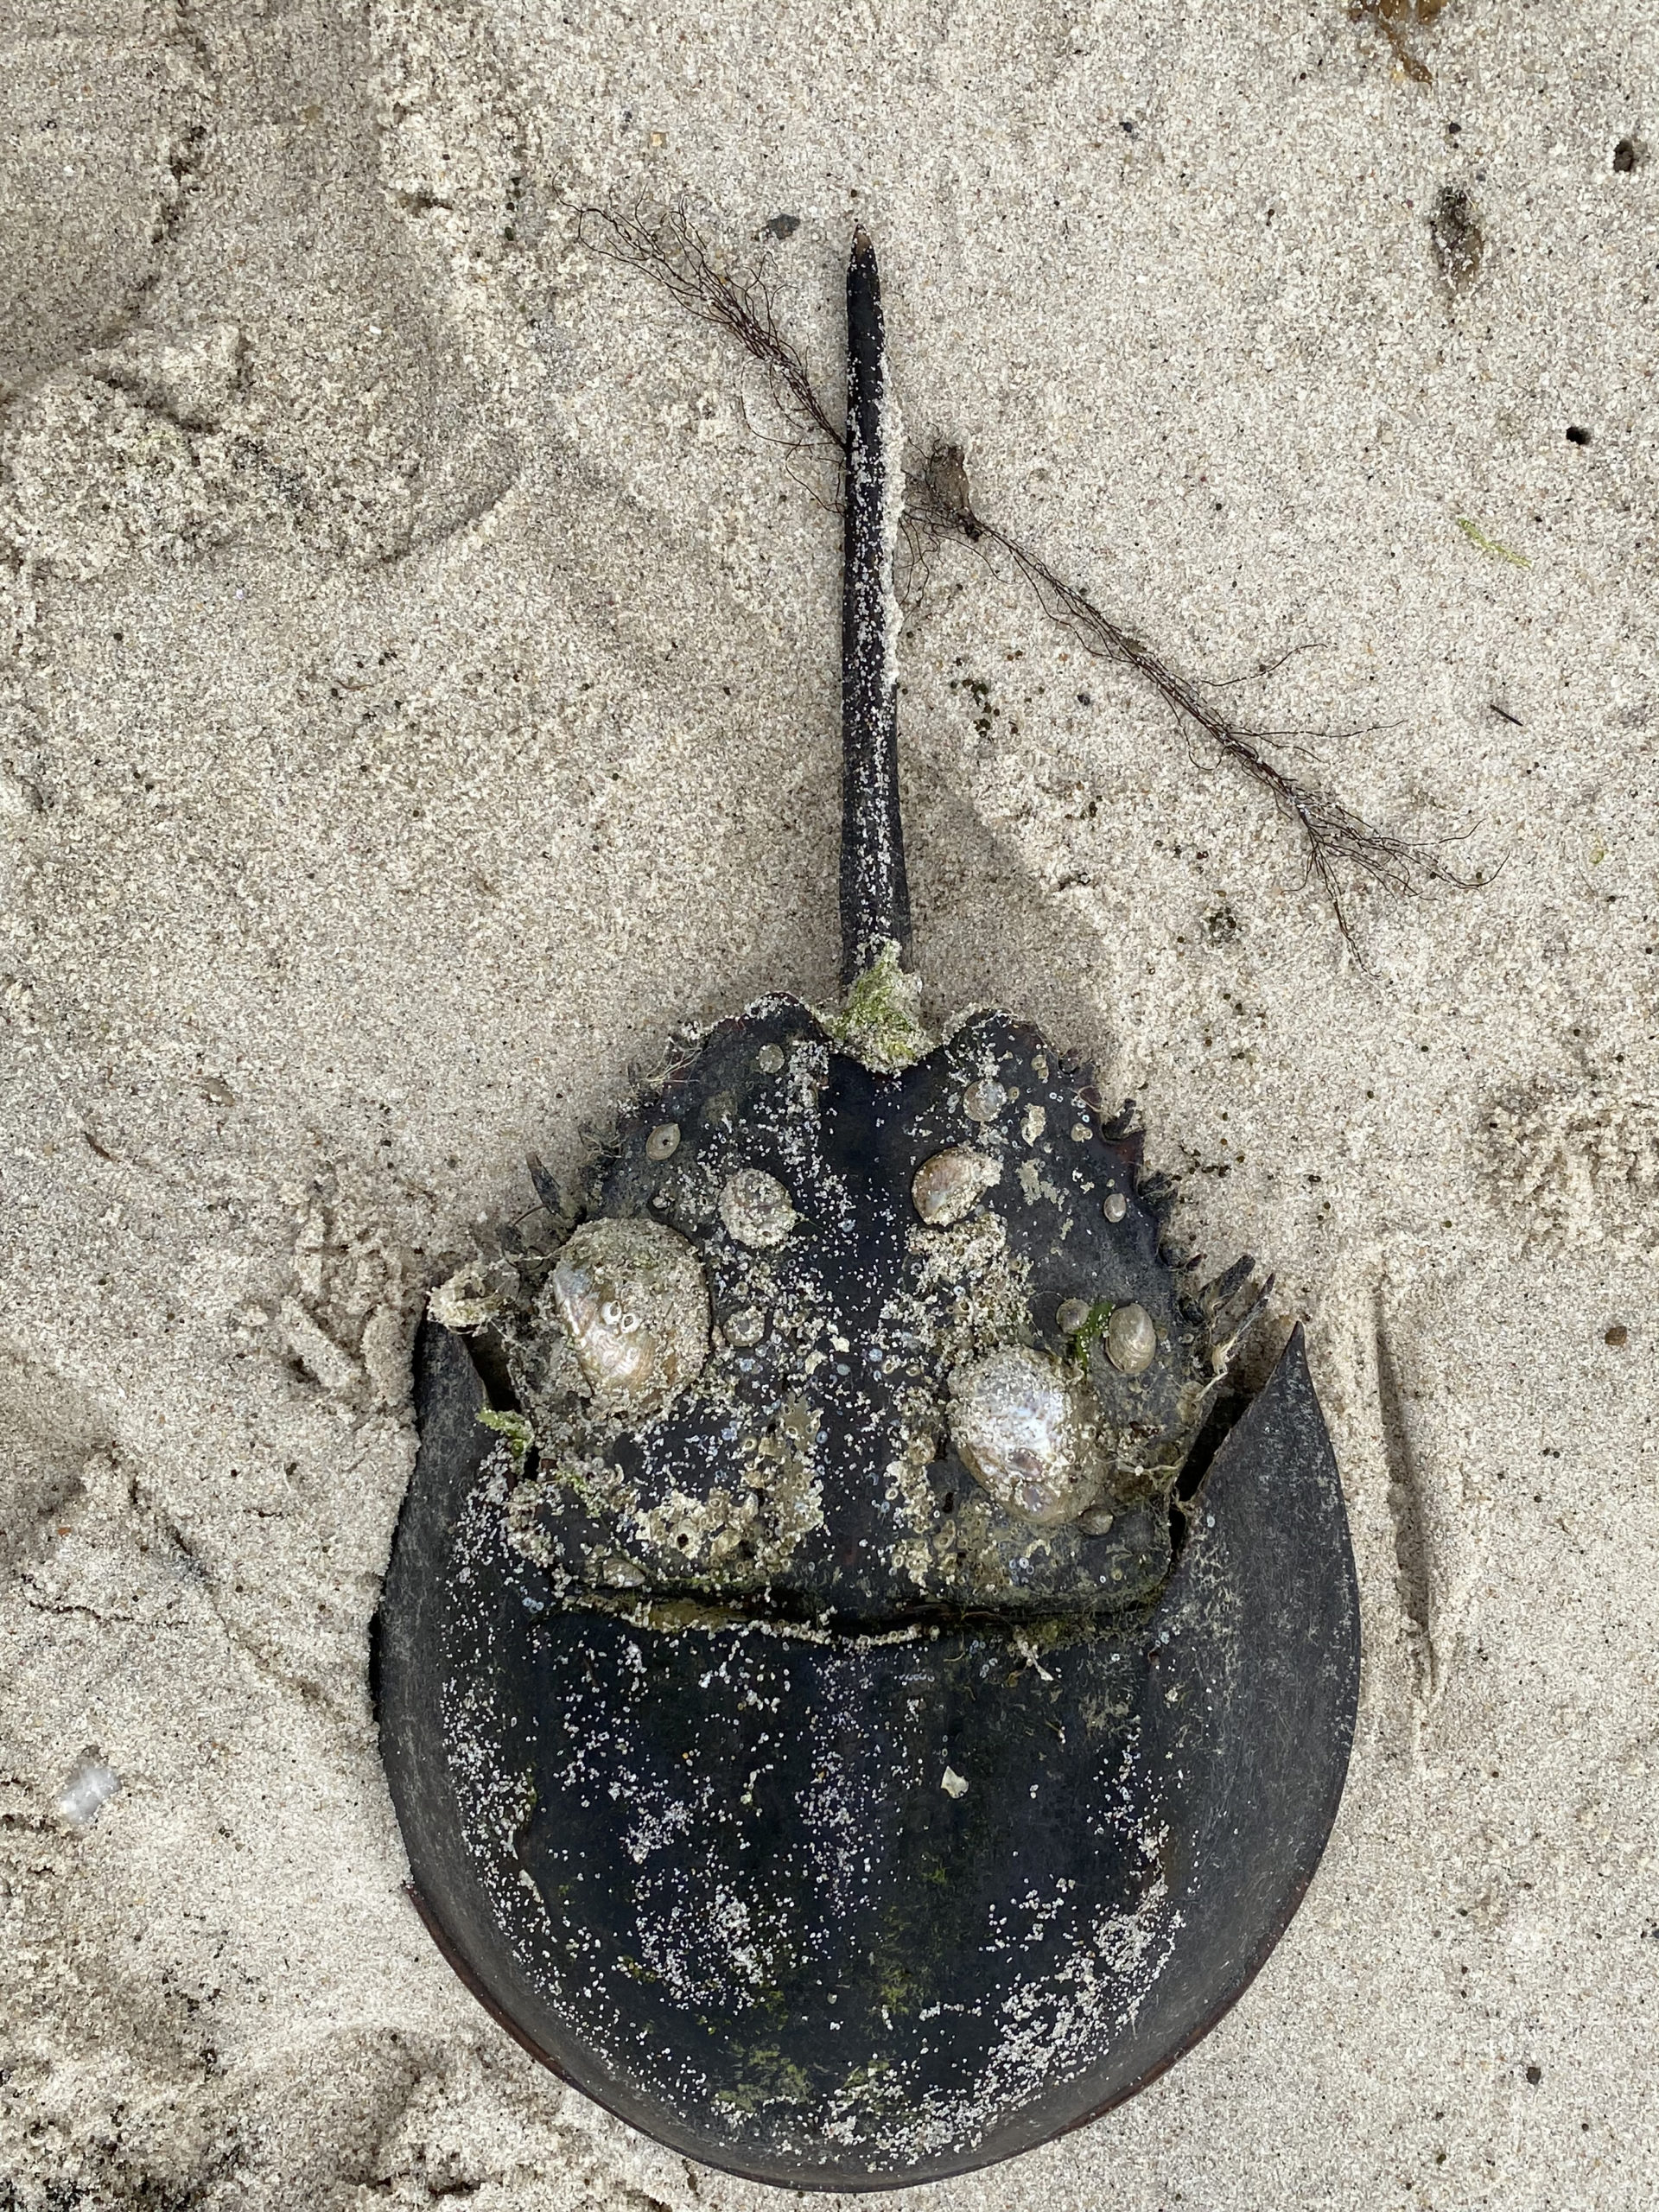 The horseshoe crab's shell can tell al lot about the age and health of the animal.  DANA SHAW